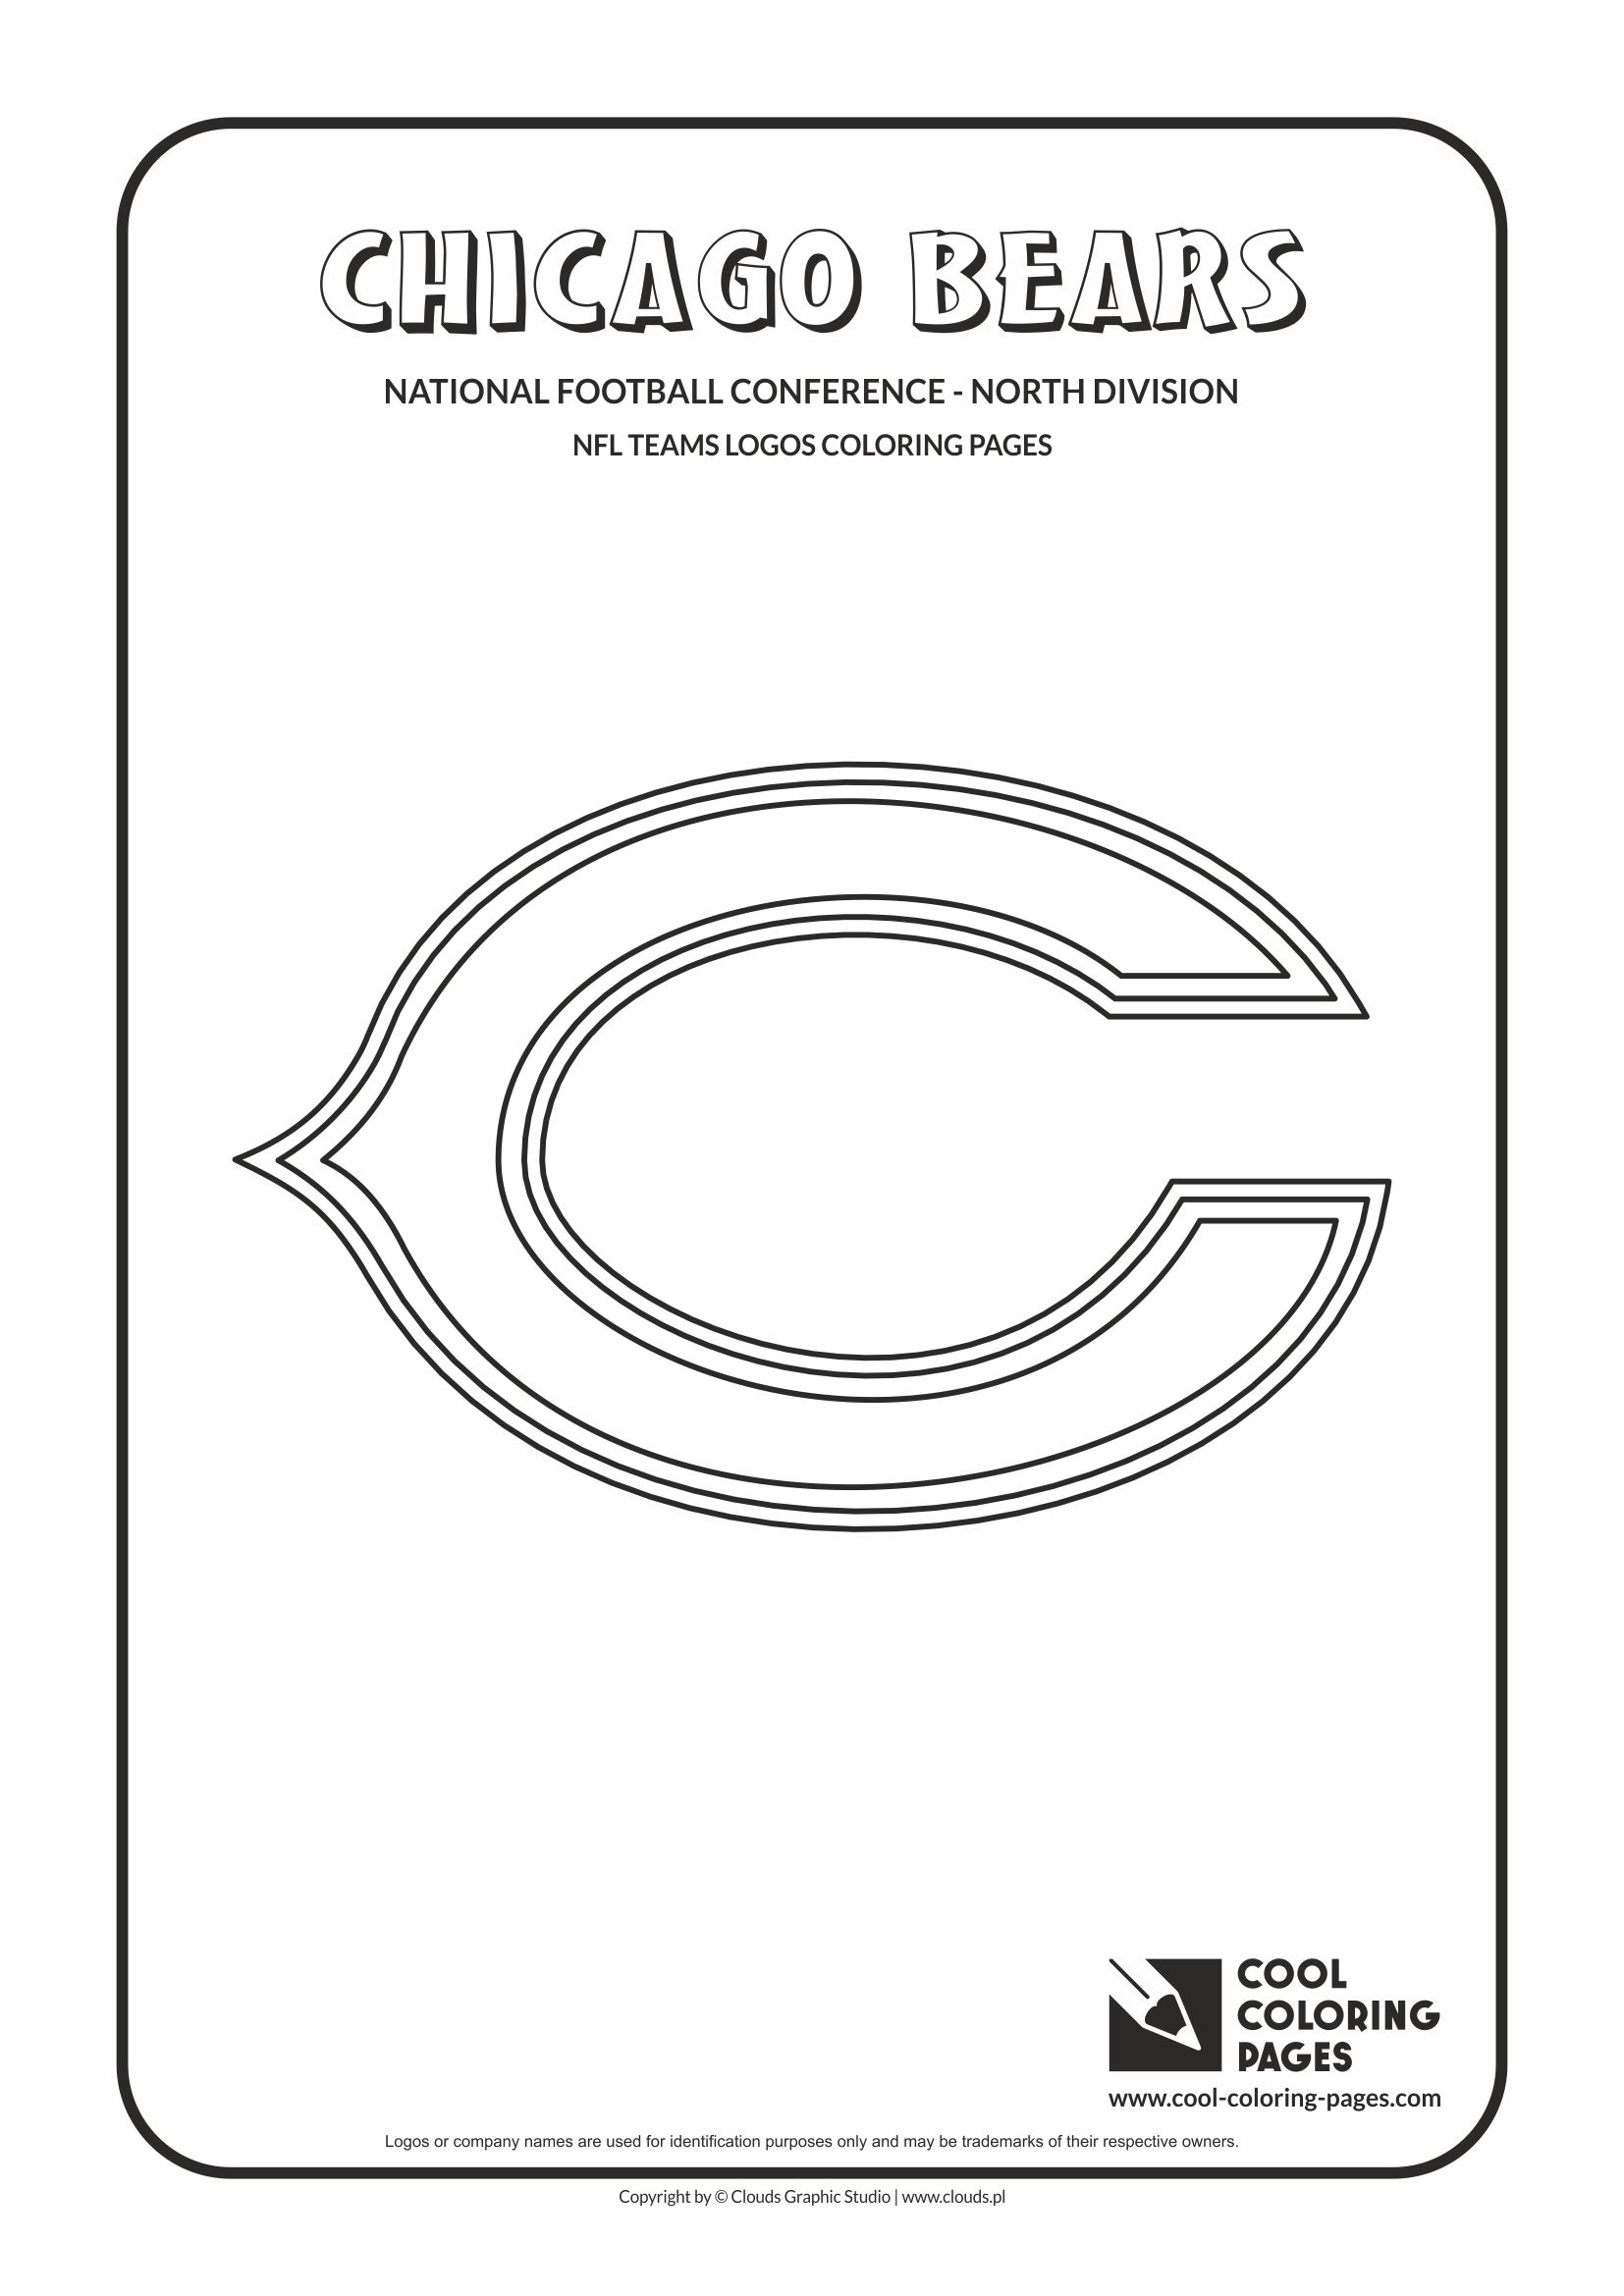 Cool Coloring Pages - NFL American Football Clubs Logos - National Football Conference - North Division / Chicago Bears logo / Coloring page with Chicago Bears logo